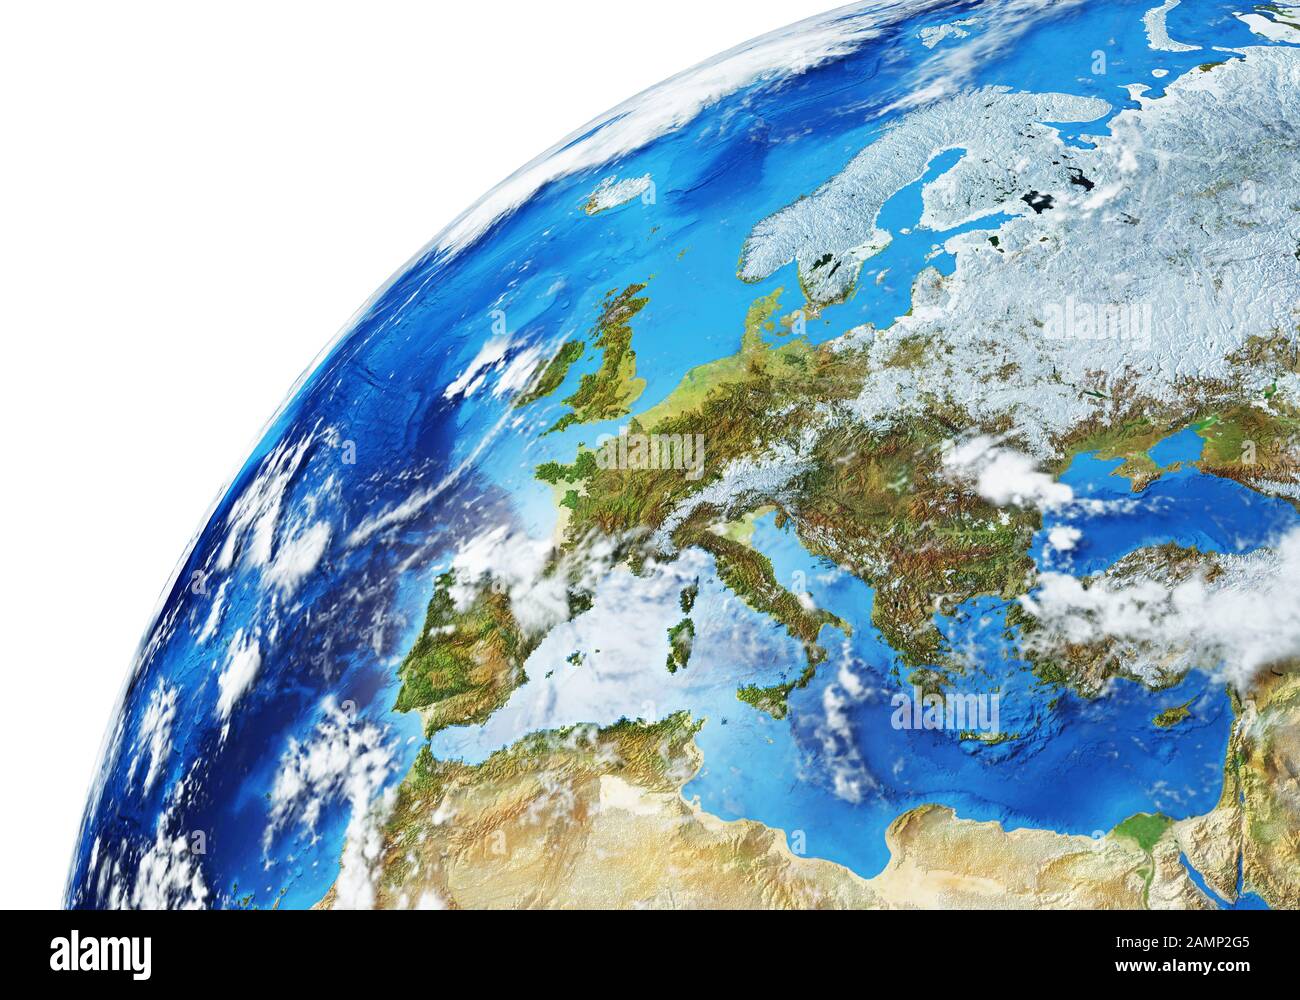 Earth globe close- up of the Europe area. Very detailed and Photo realistic. With clouds. (Original maps provided by NASA.) Stock Photo